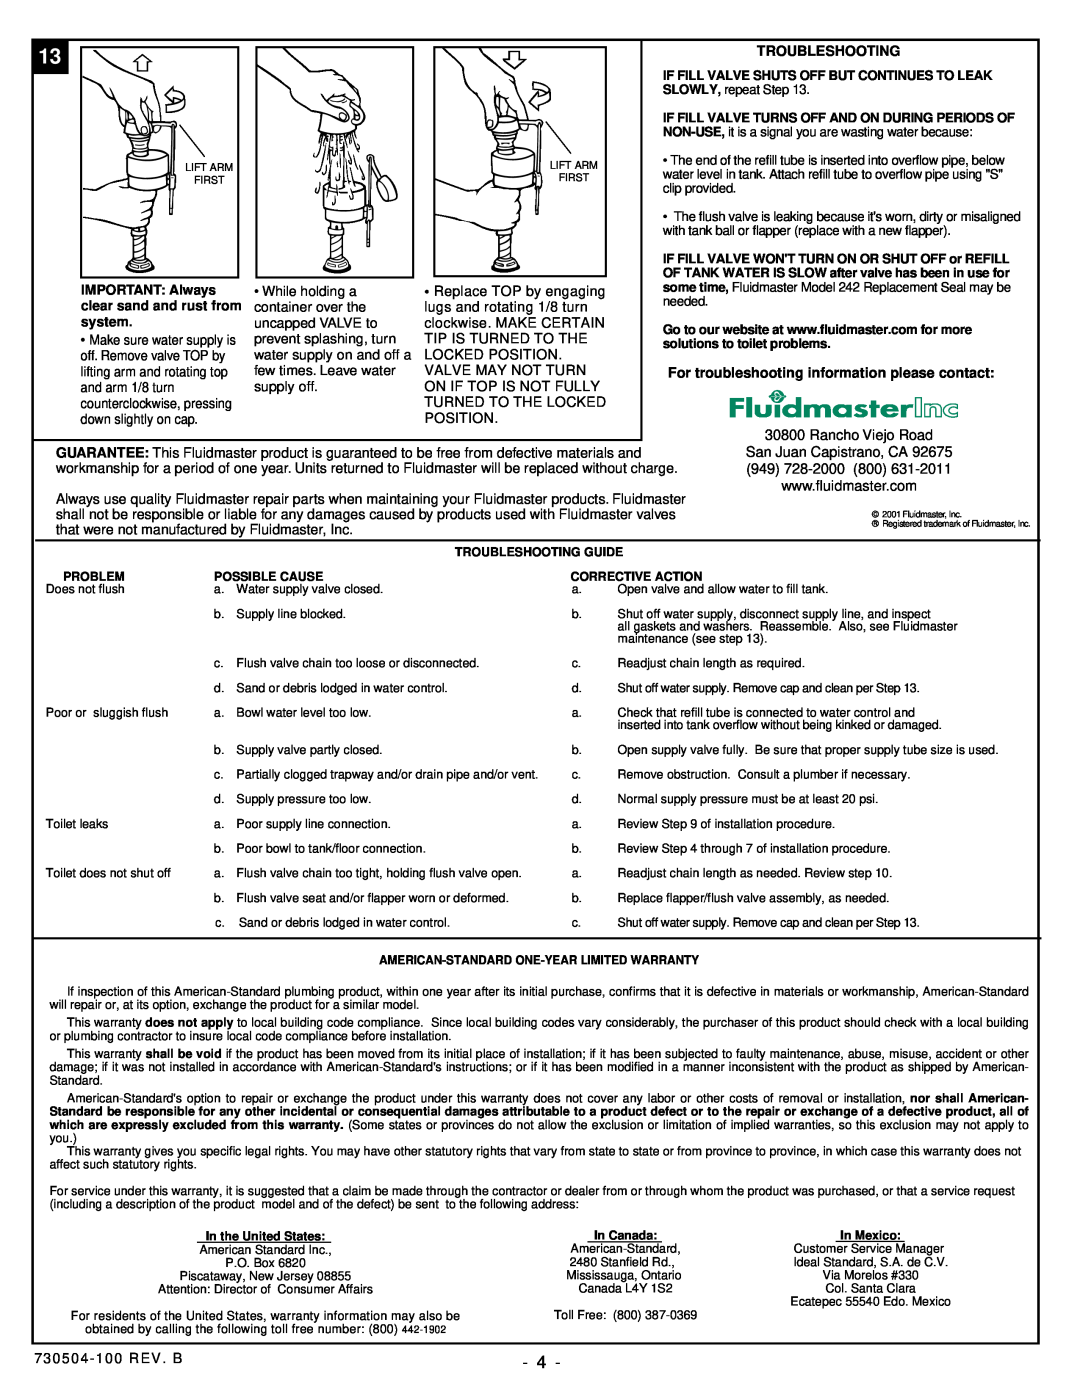 American Standard 3600, 2646, 656 installation instructions Troubleshooting, For troubleshooting information please contact 